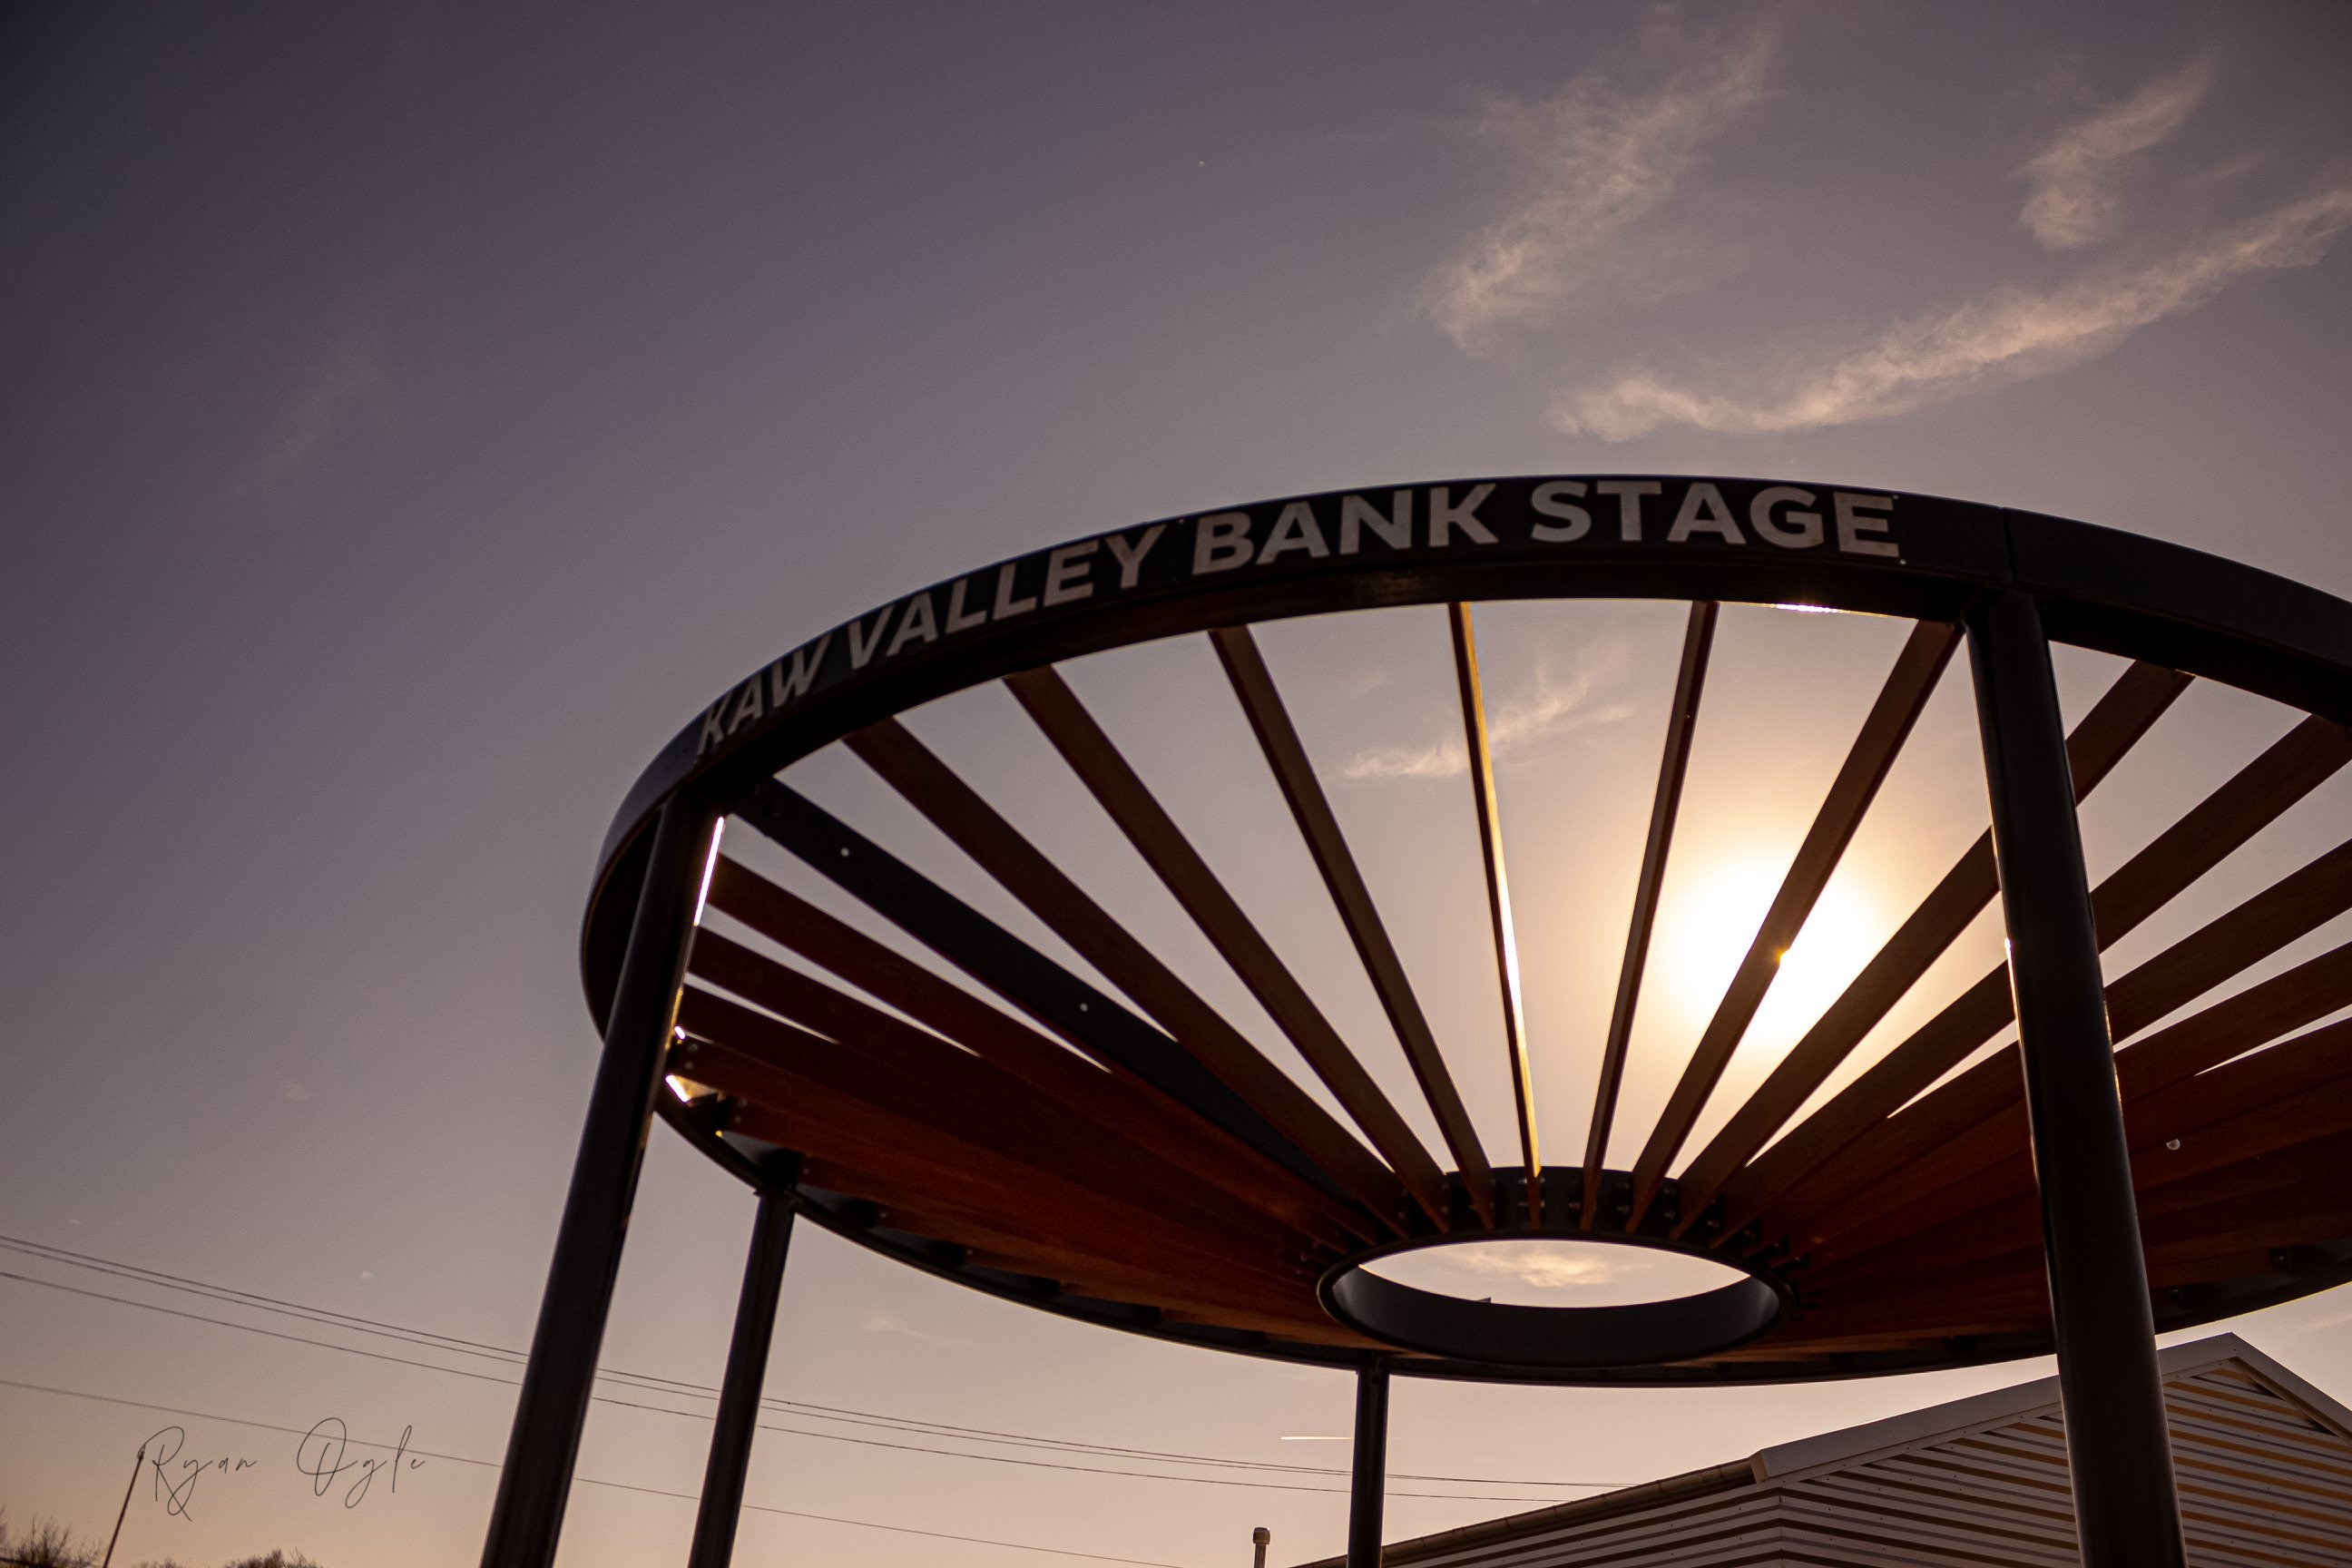 Kaw Valley Bank Stage.